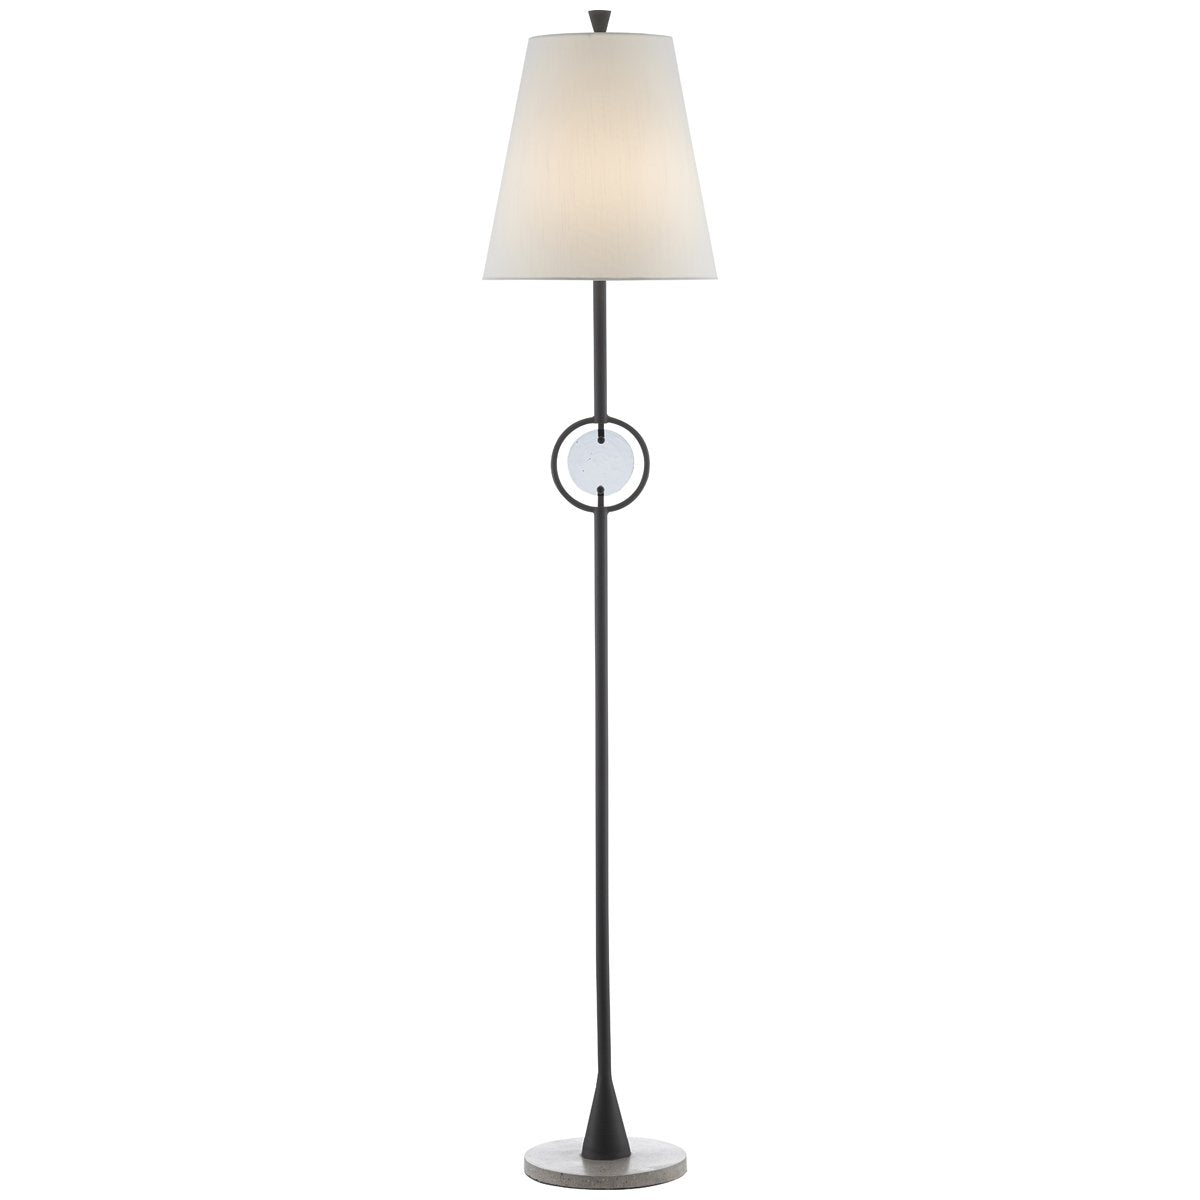 Currey and Company Privateer Floor Lamp